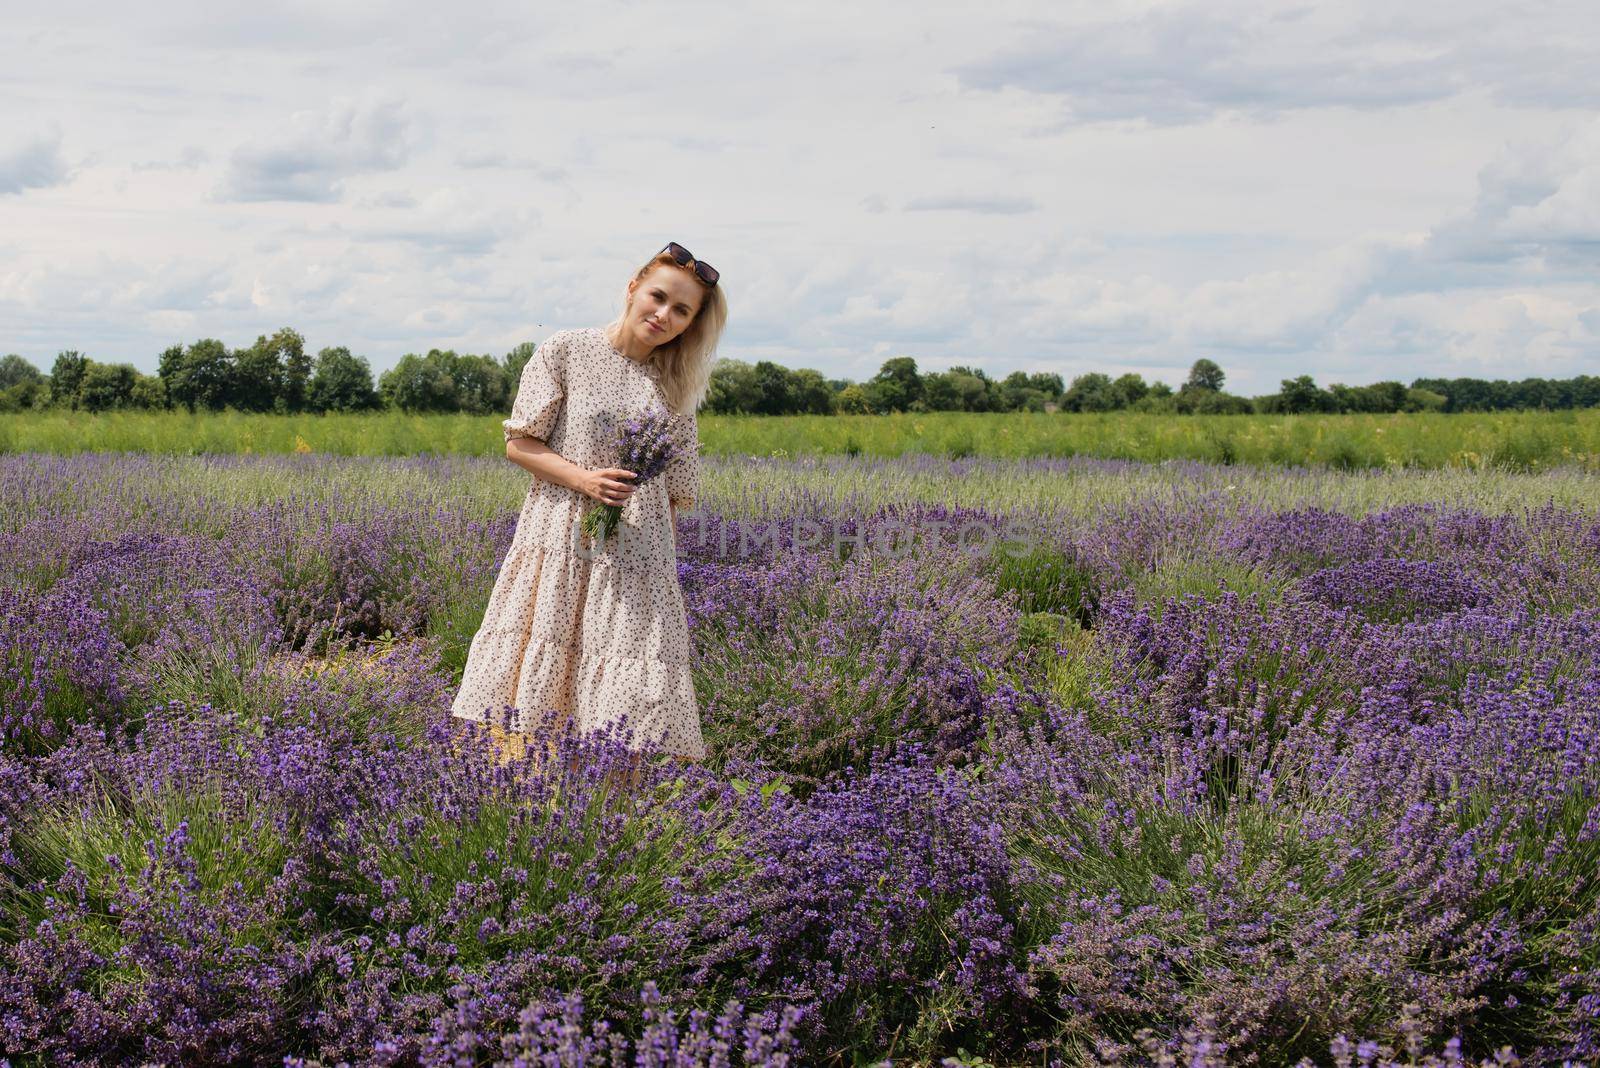 Young woman in a lavender field holding a bouquet of lavender a sunny day. by leonik